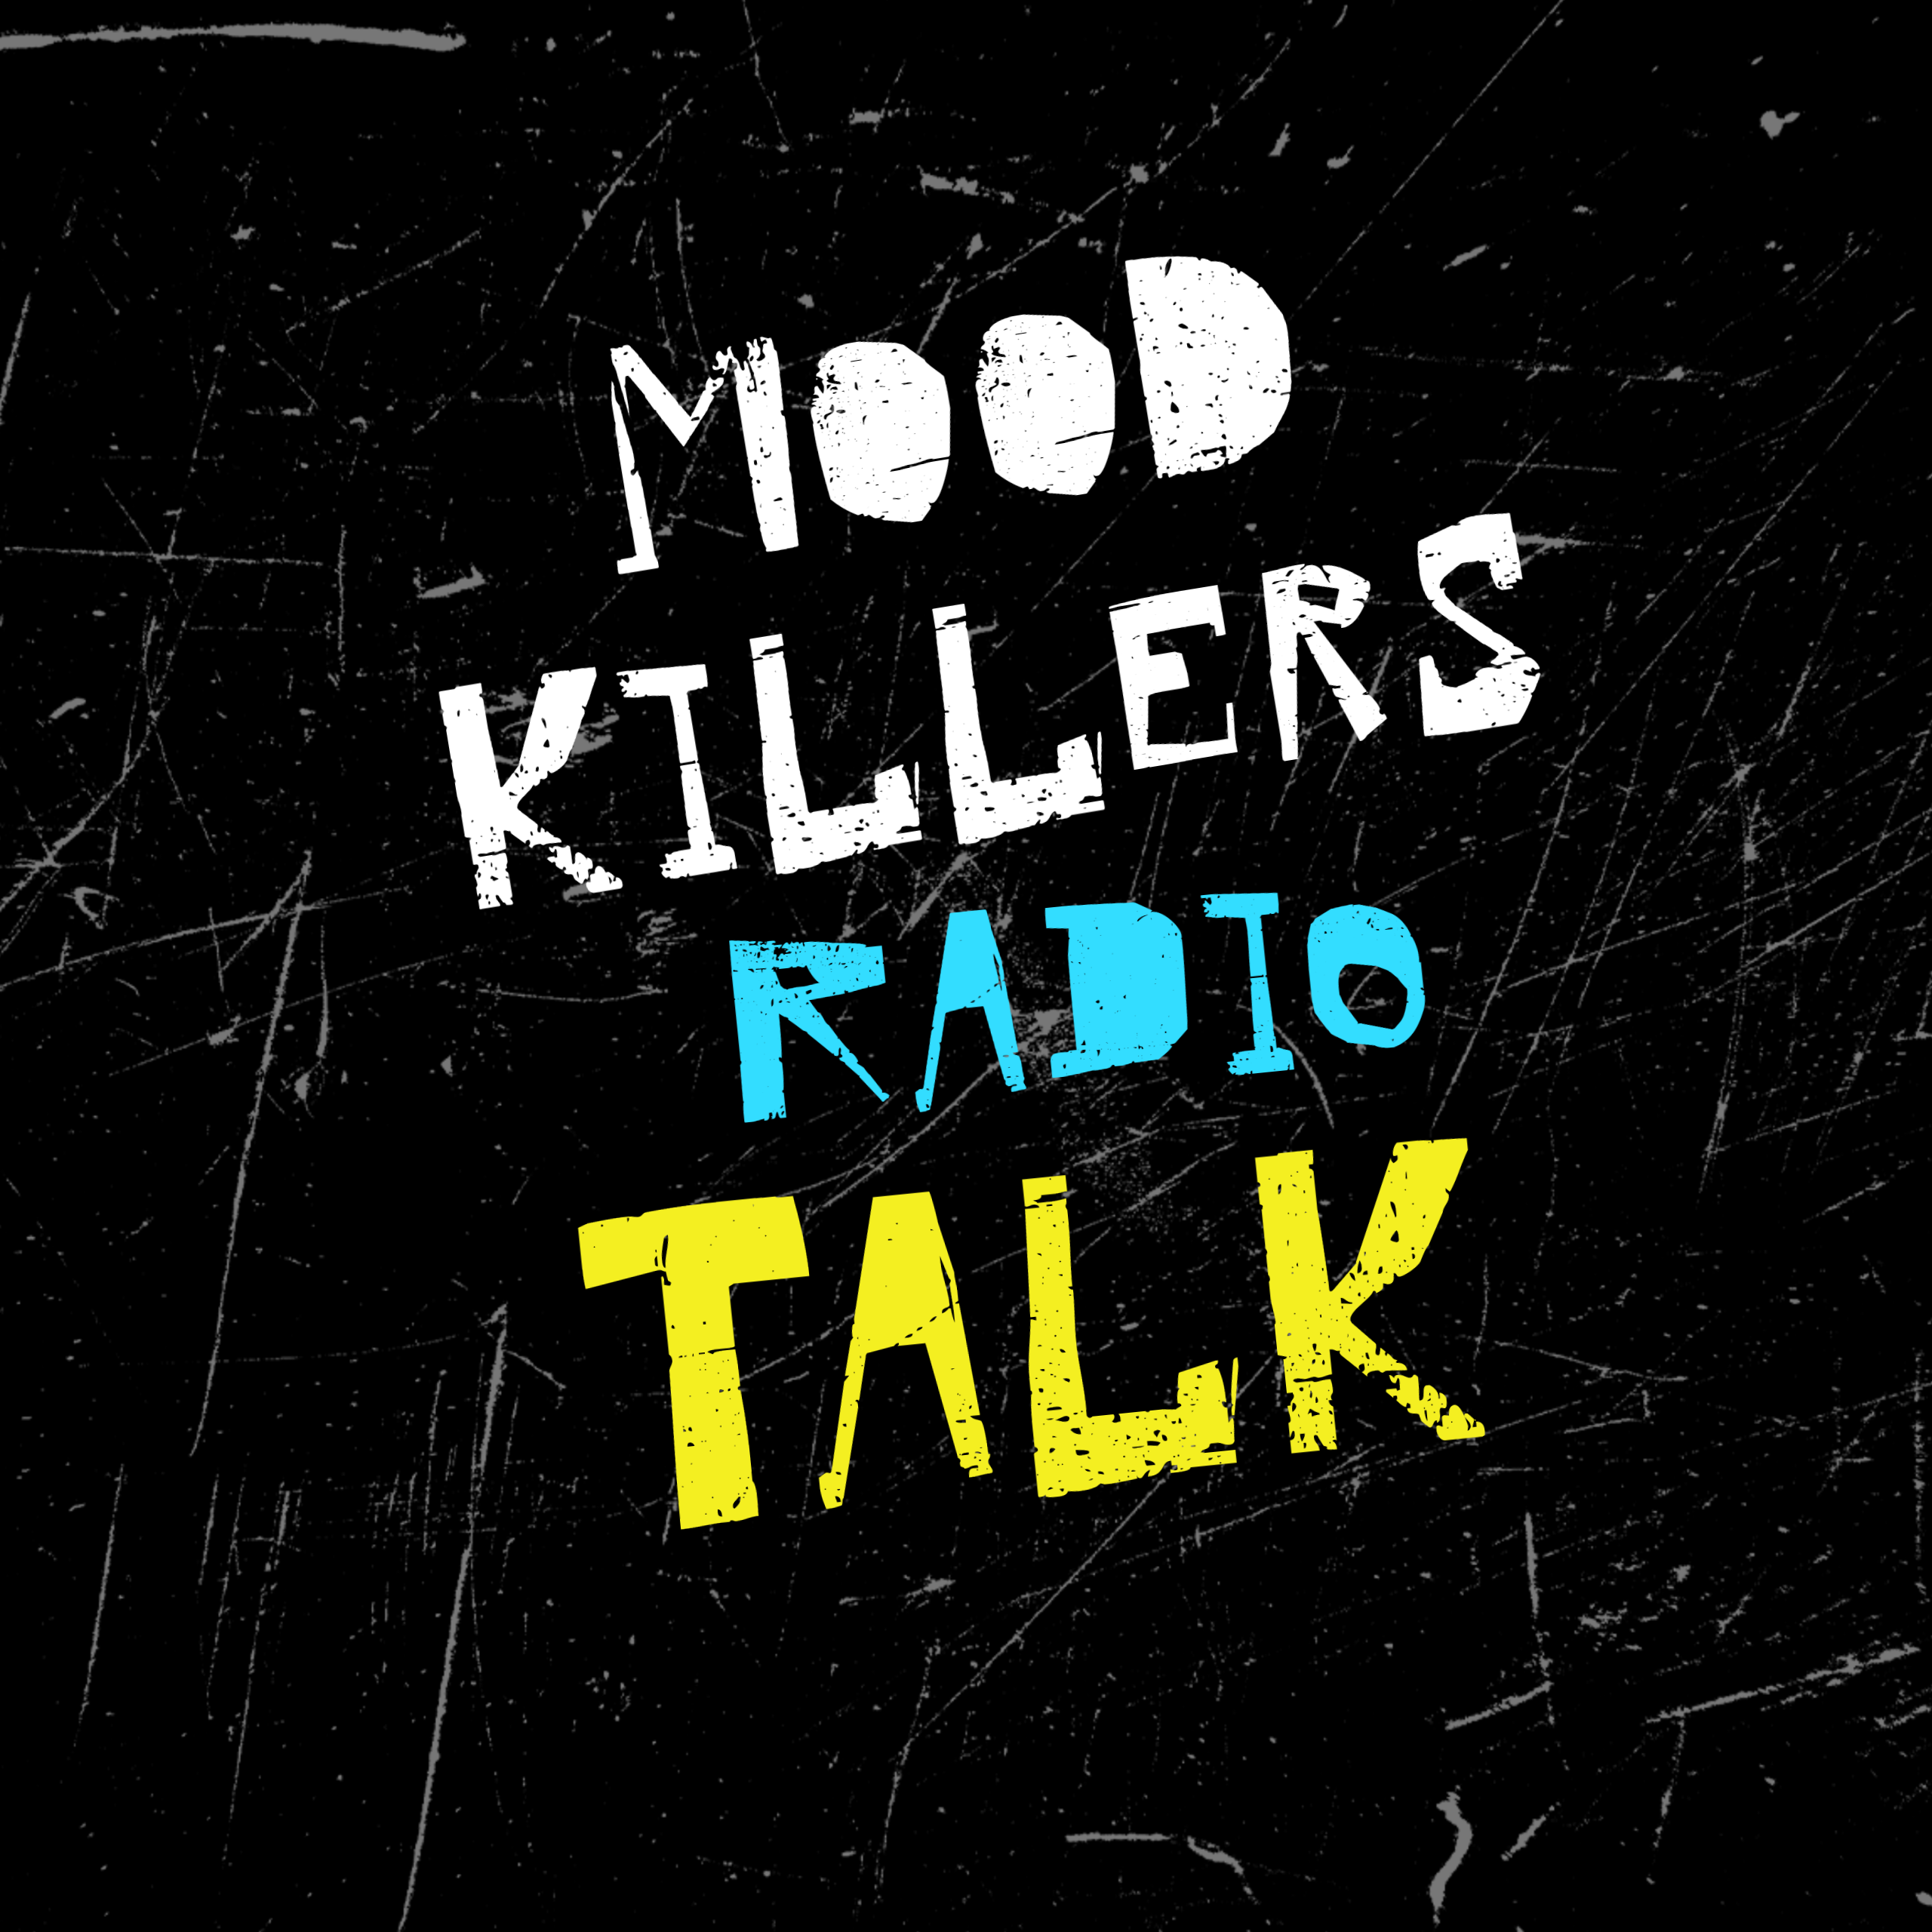 Art for ASK MARCONI by mood killers